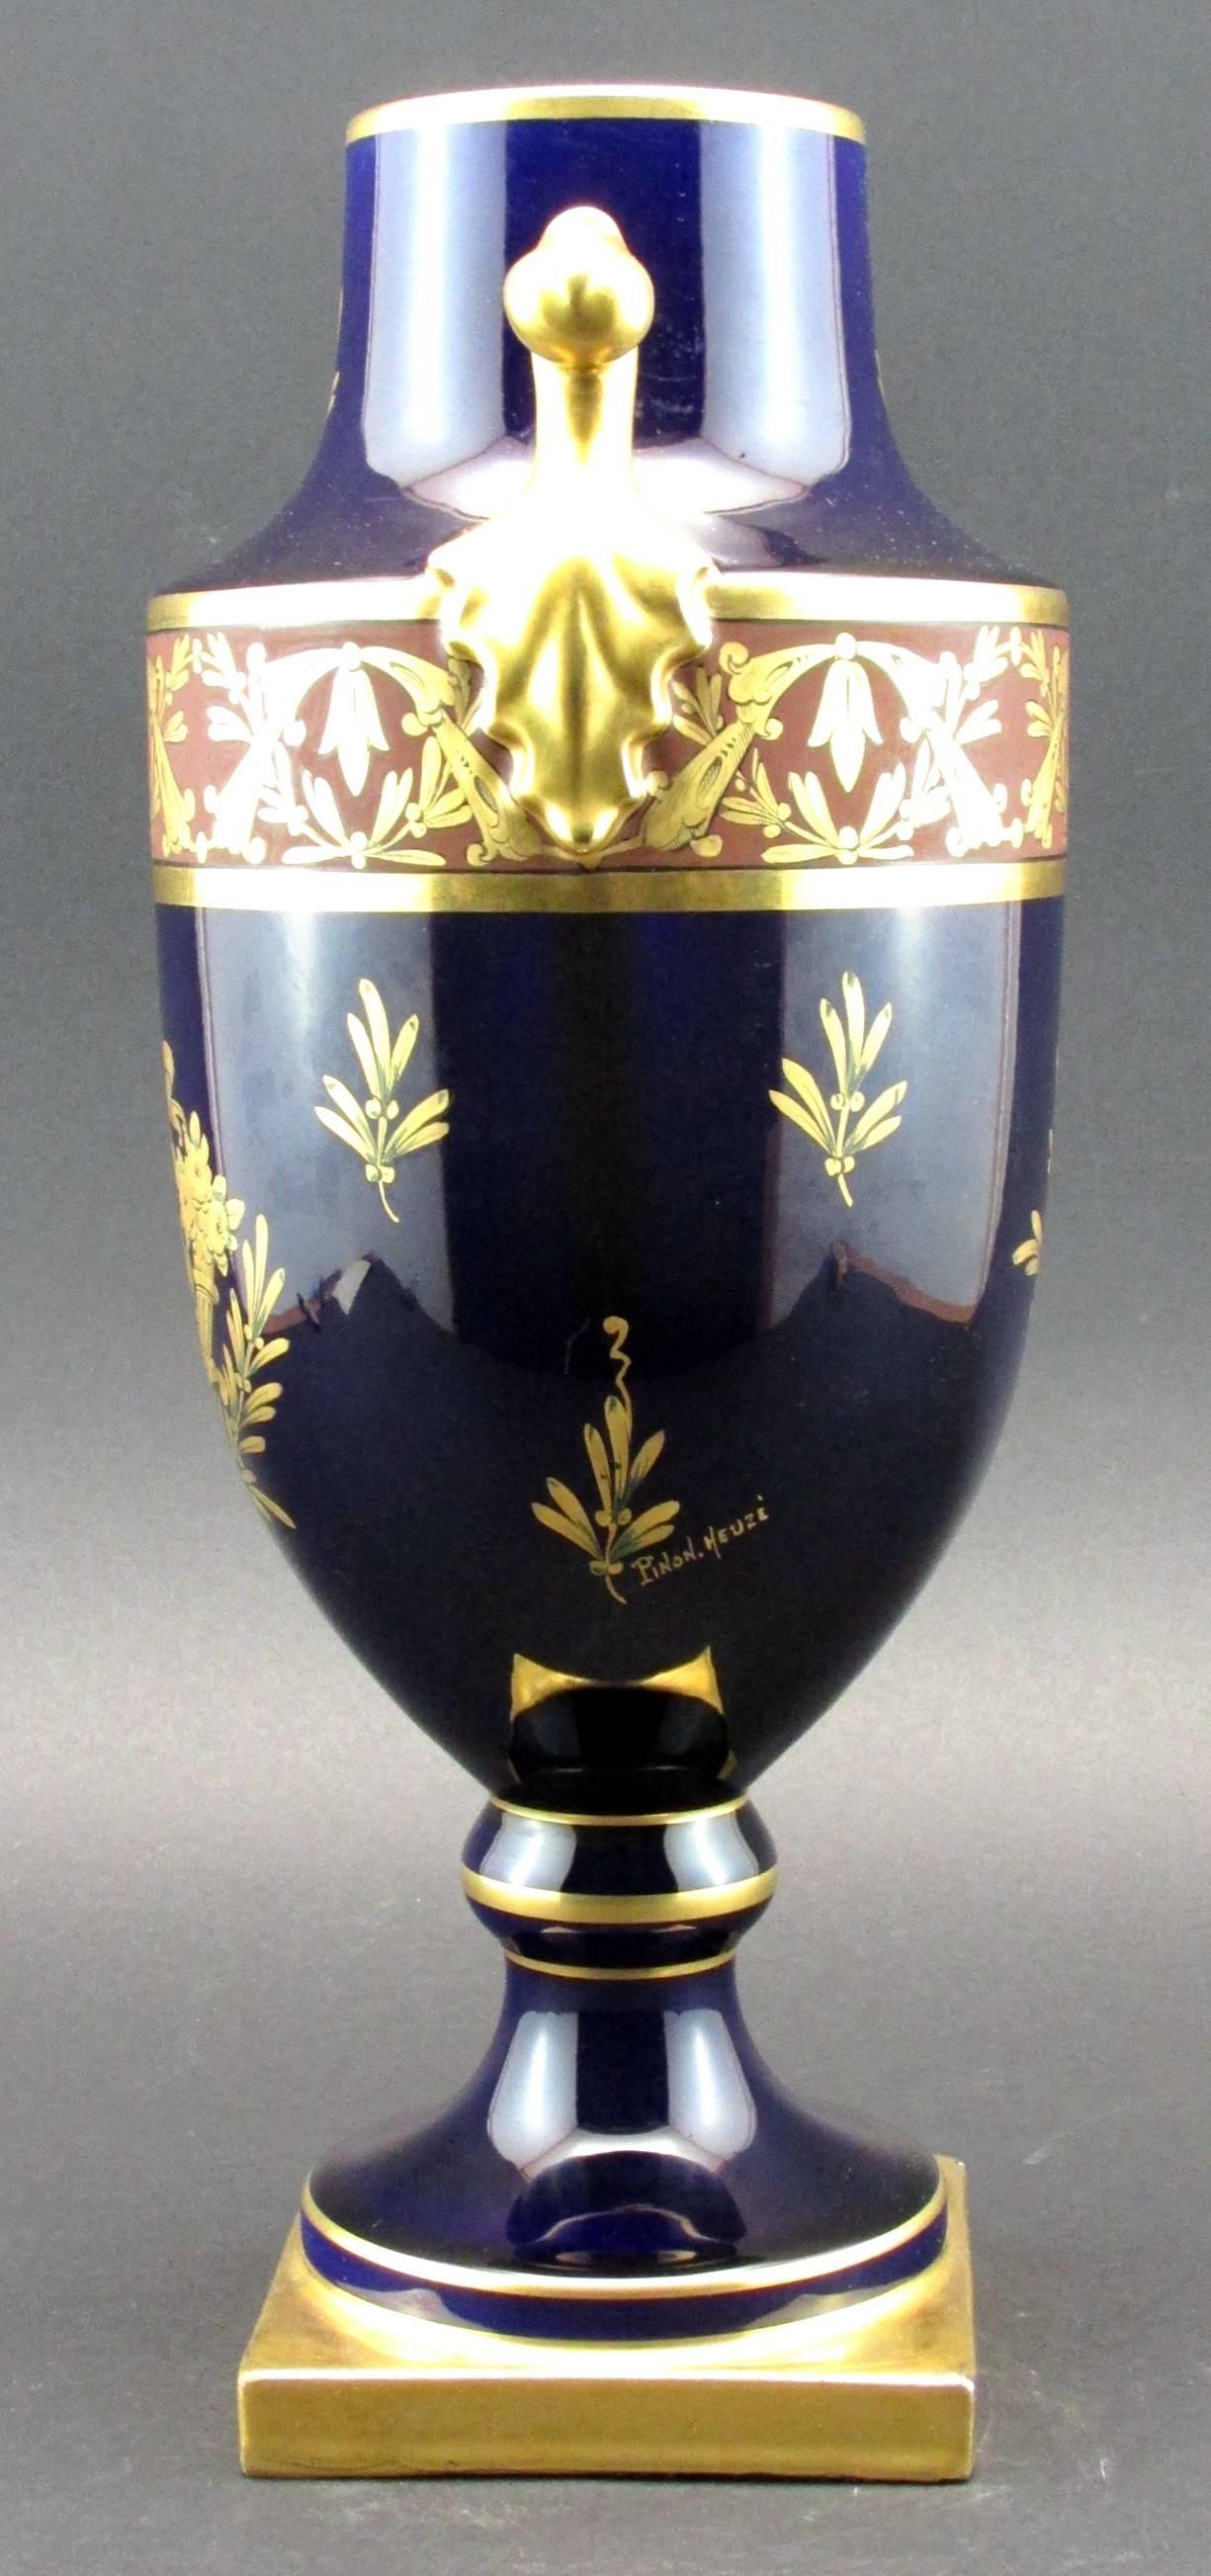 French A Large Art Deco Porcelain Vase by Pinon Heuze for Sevres, France, Circa 1930 For Sale